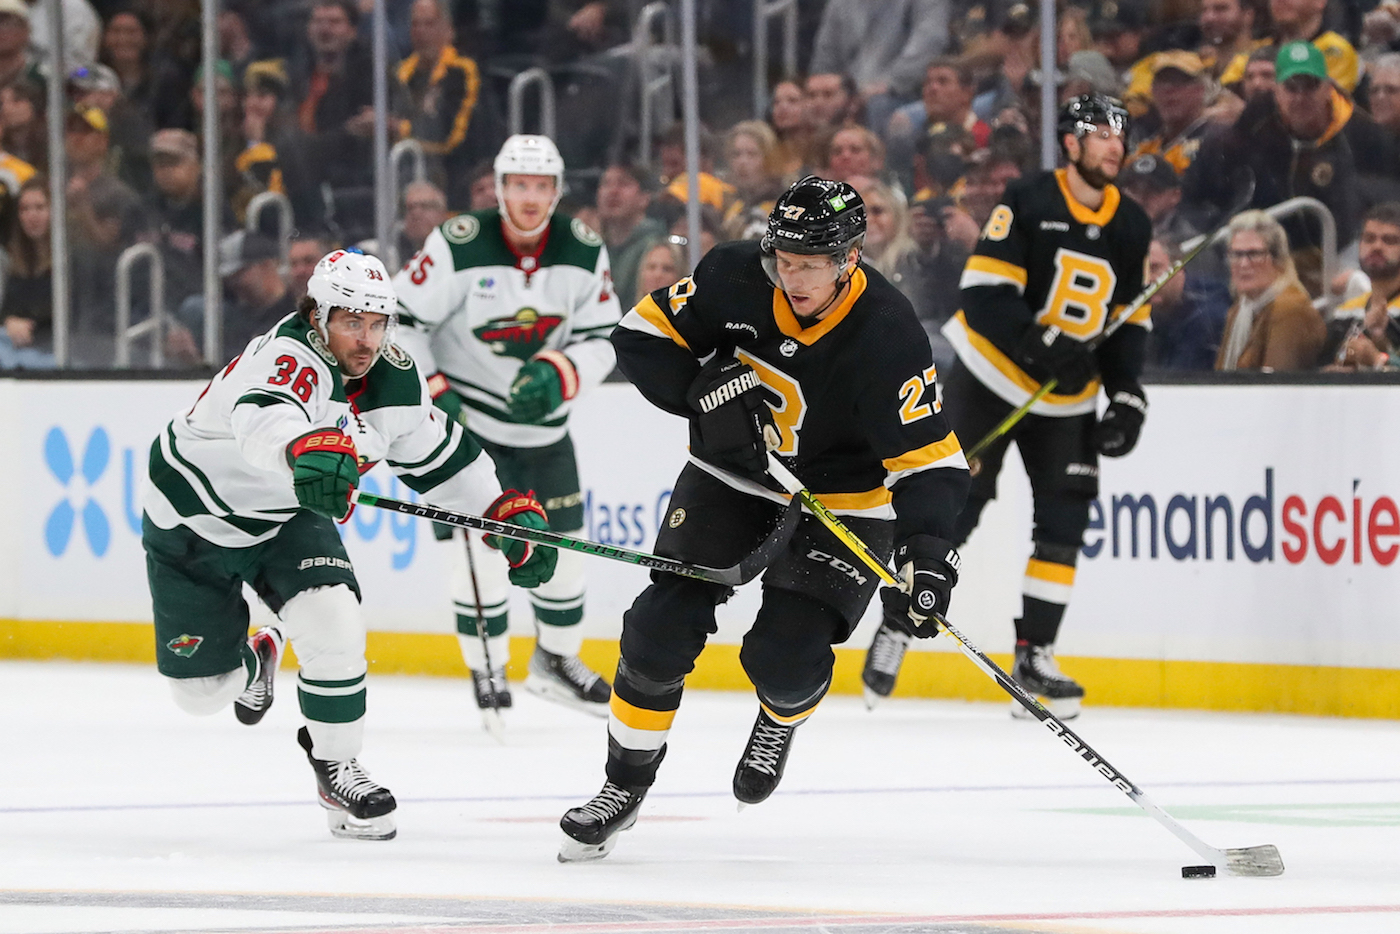 Oct 22, 2022; Boston, Massachusetts, USA; Minnesota Wild right wing Mats Zuccarello (36) defends Boston Bruins defenseman Hampus Lindholm (27) during the second period at TD Garden. Mandatory Credit: Paul Rutherford-USA TODAY Sports